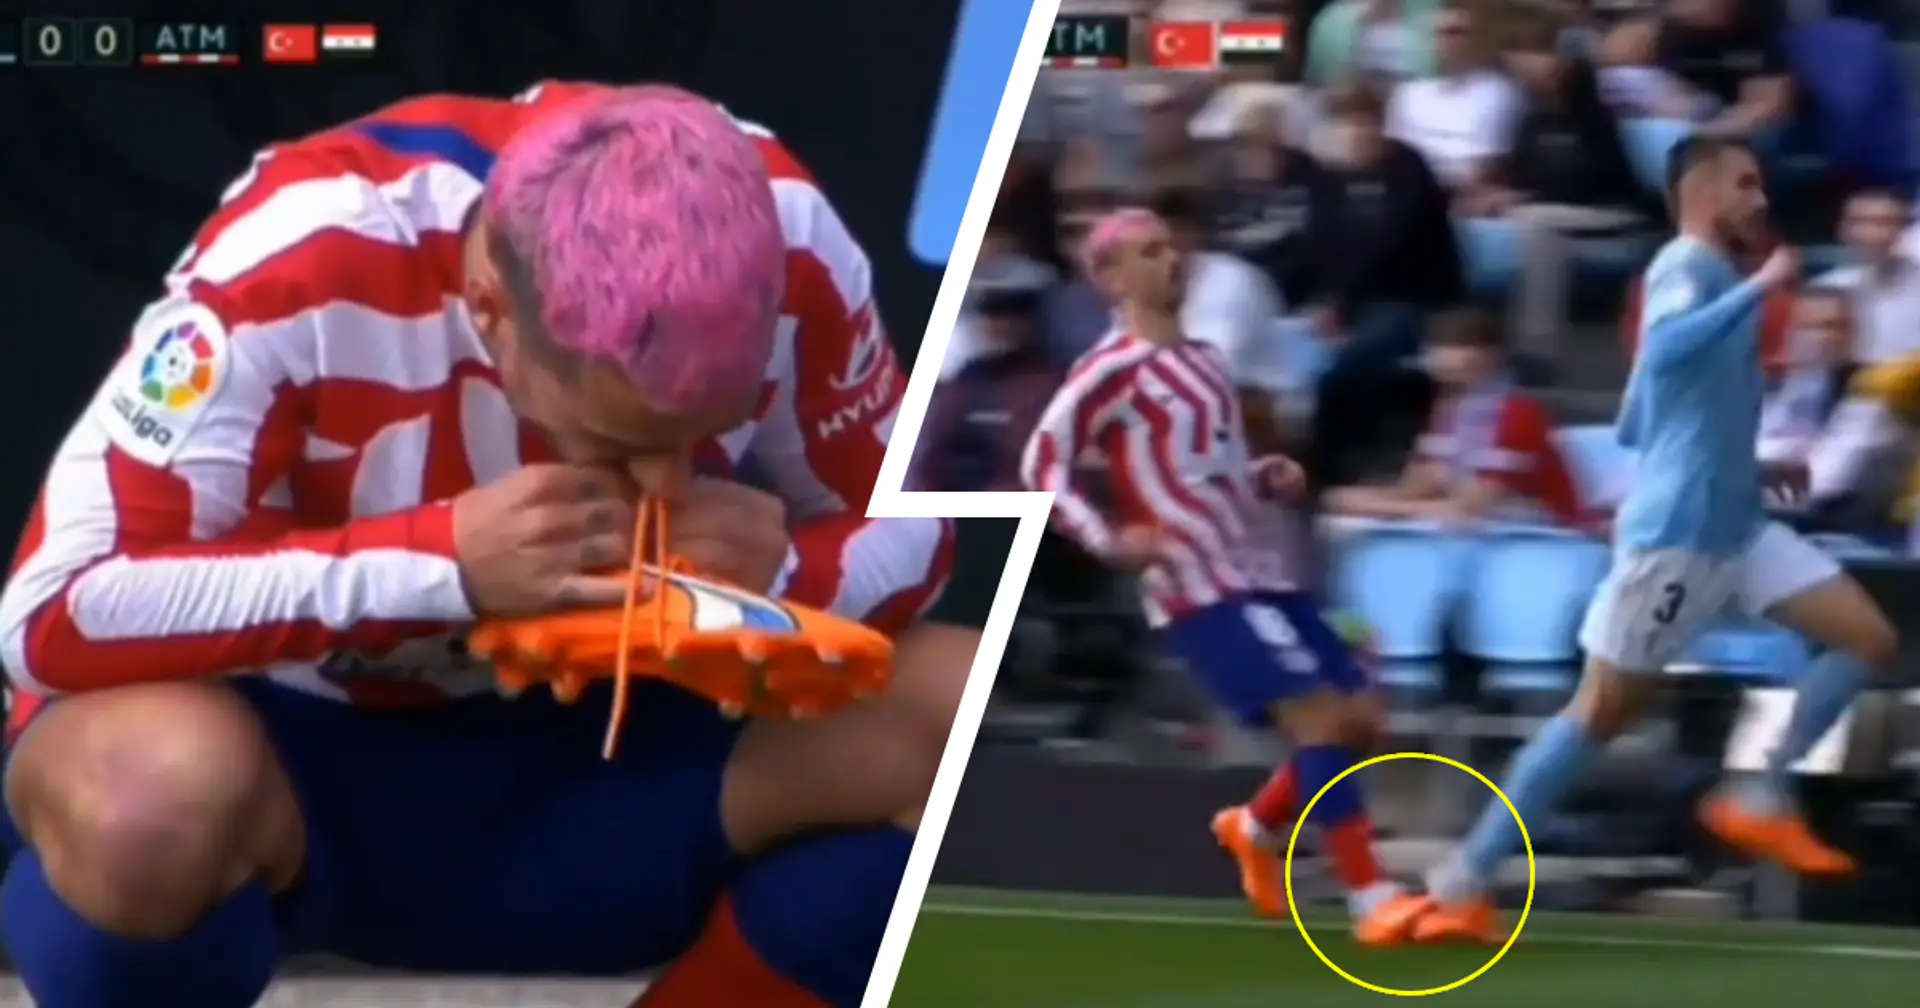 Caught on cameraa: Griezmann unties Mingueza's boot after accidentally stepping on ex-Barca teammate